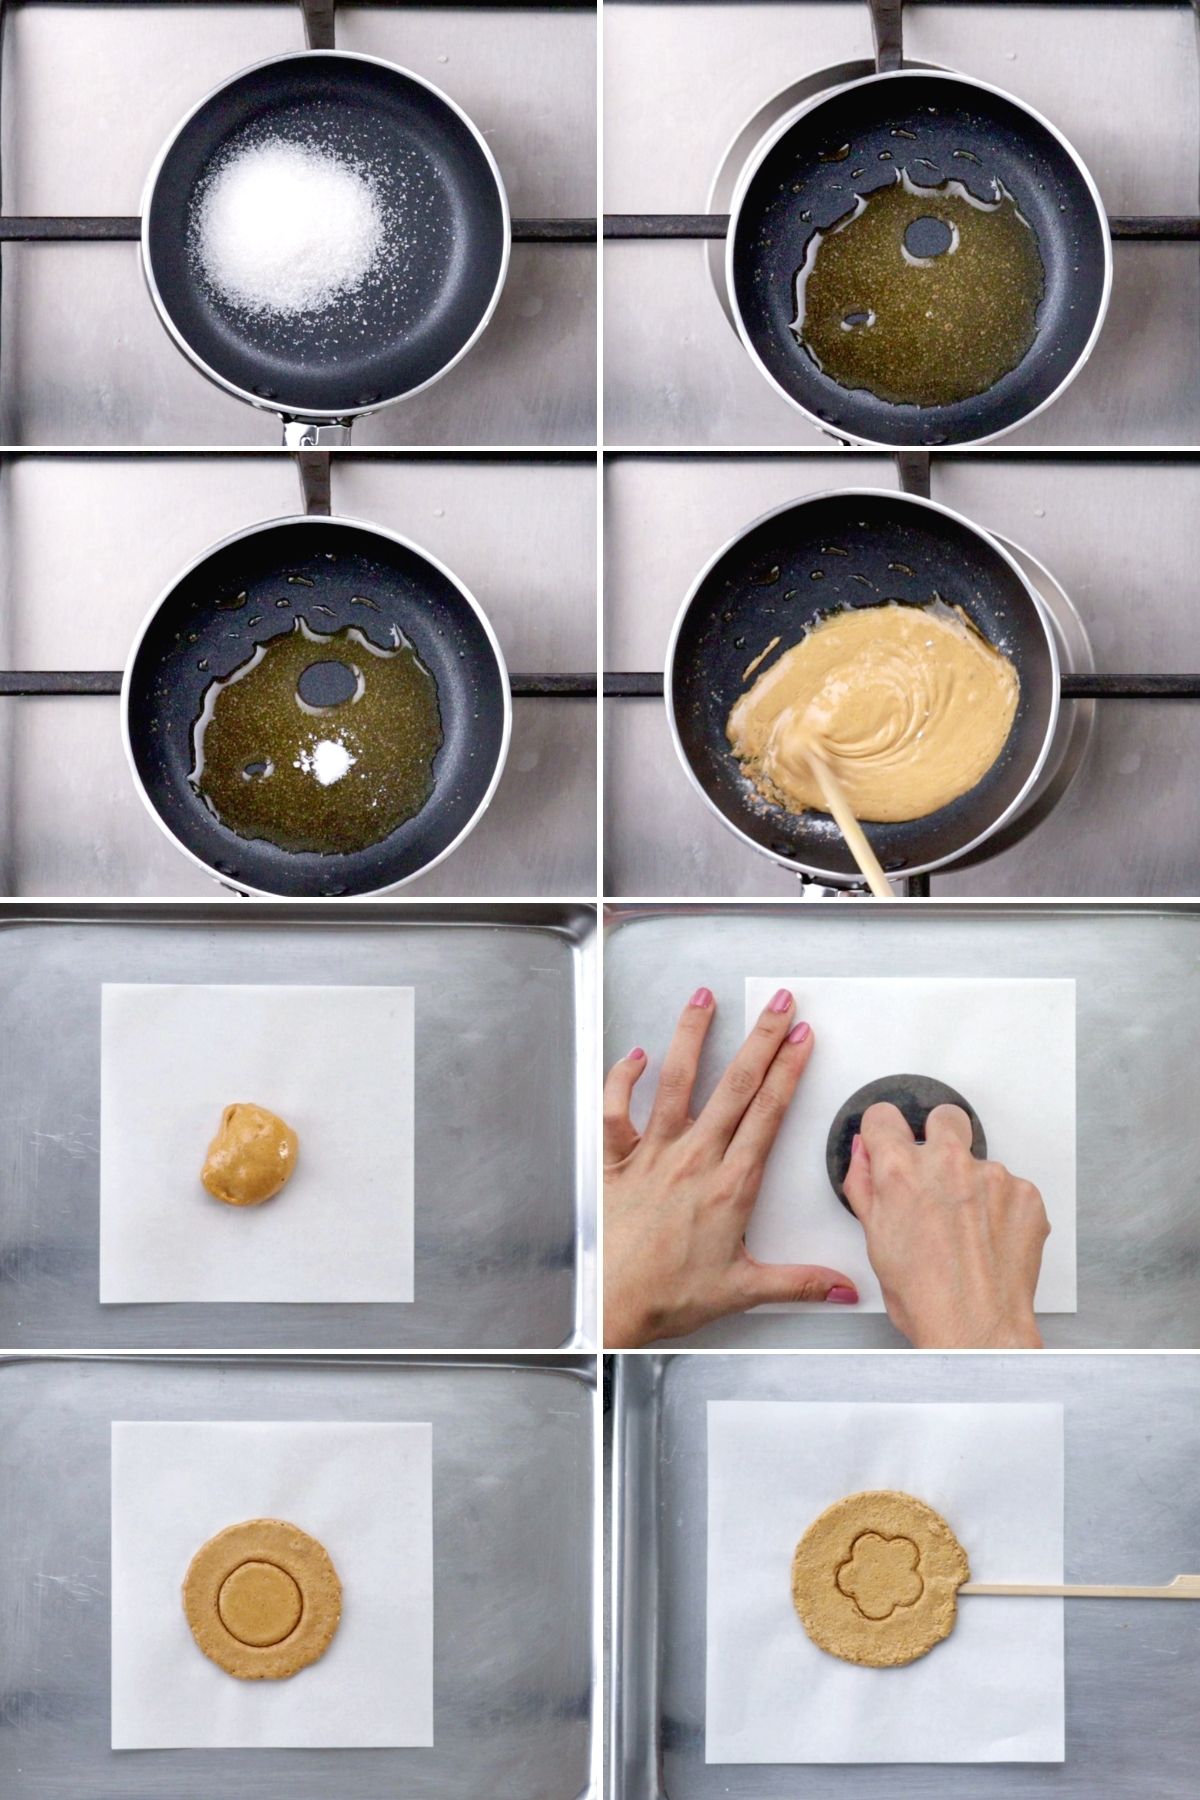 Steps on how to make Dalgona Candy.